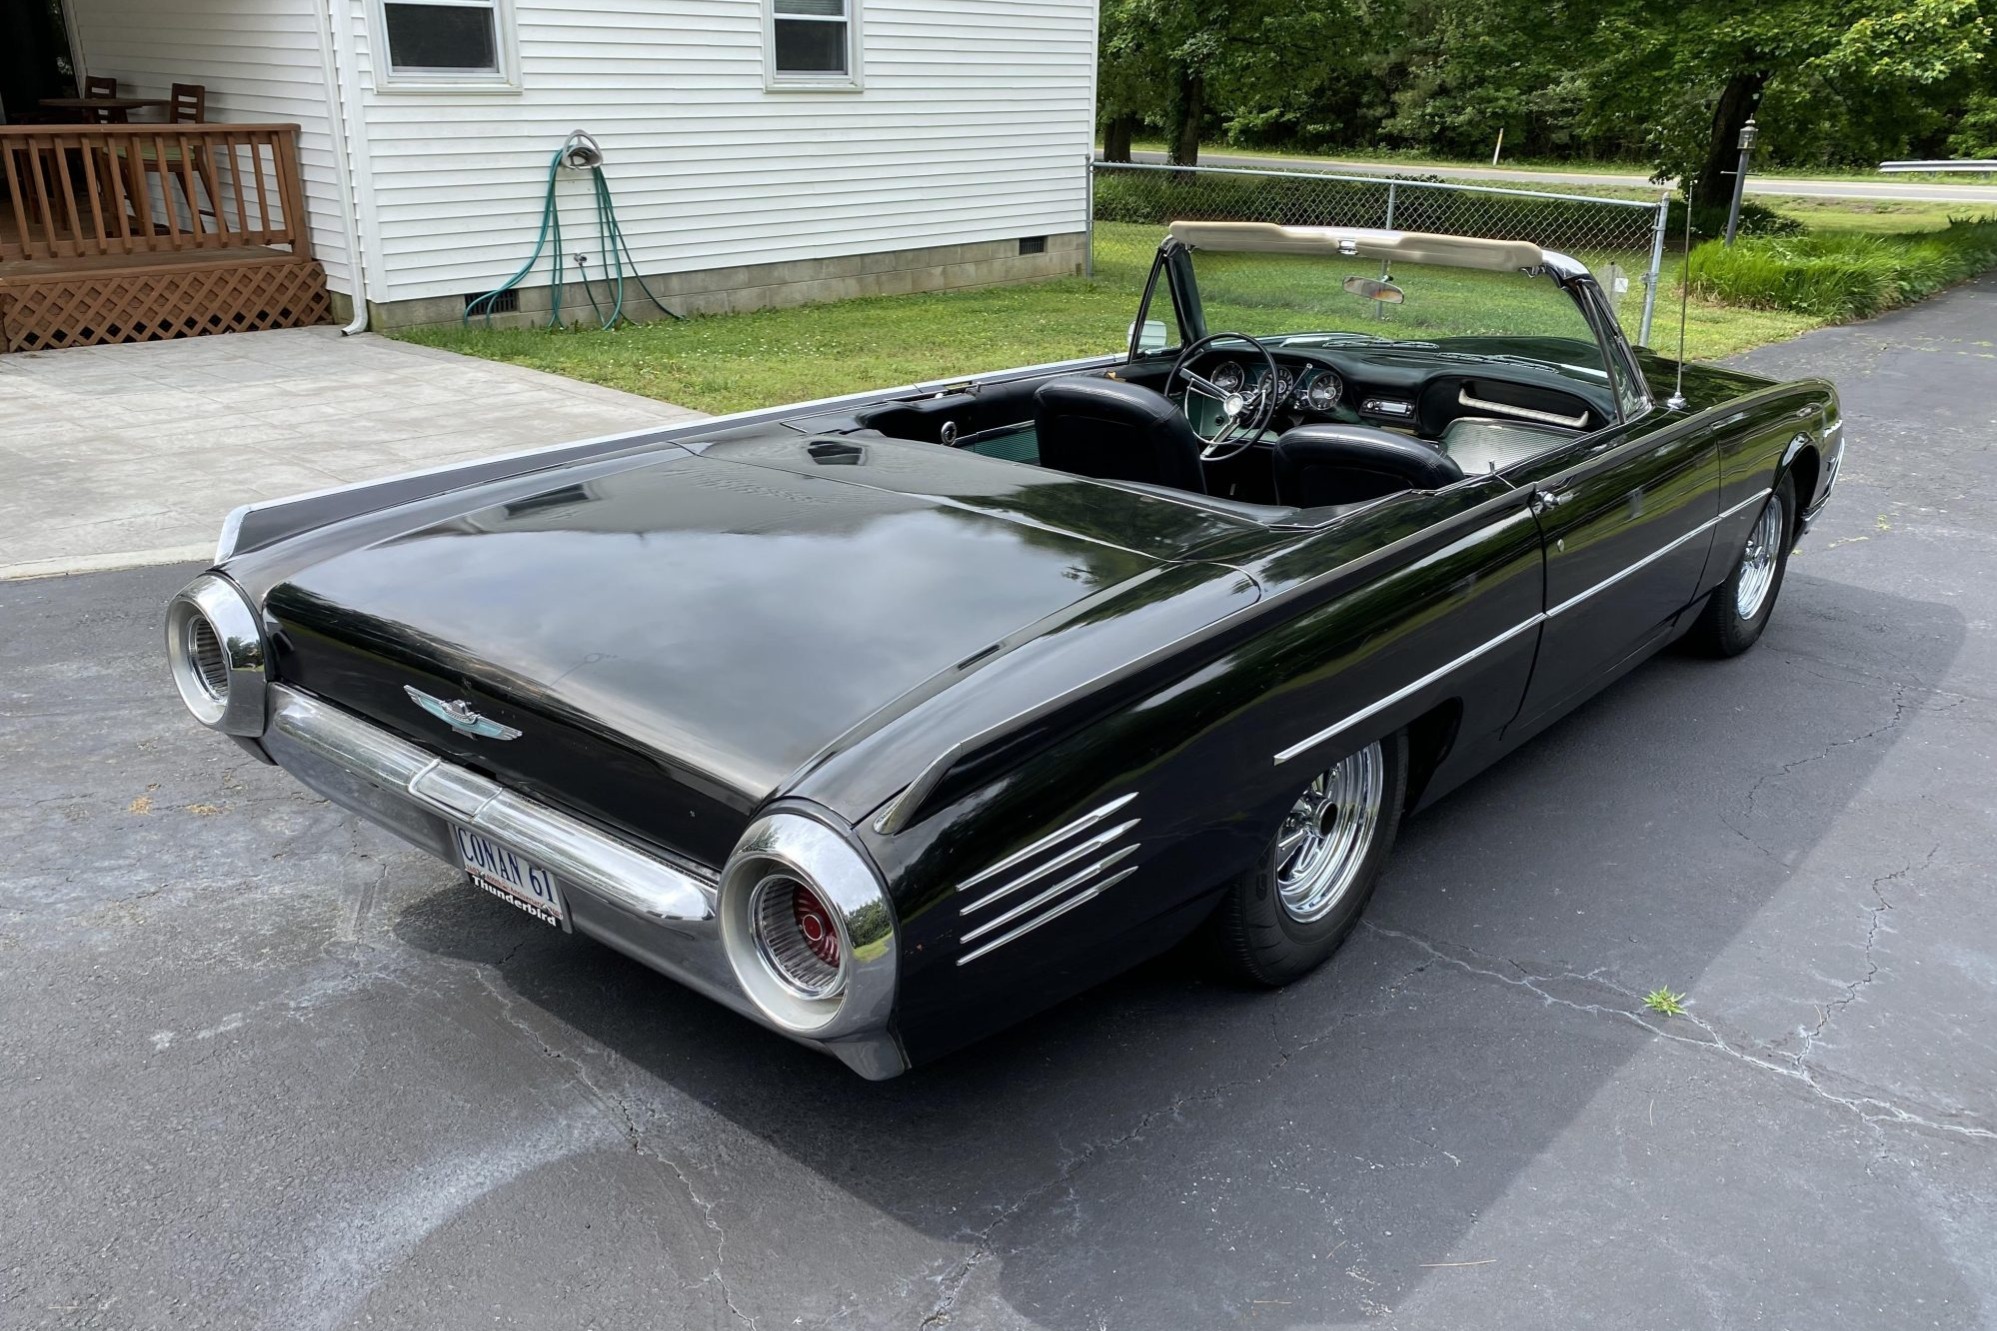 1961 Ford Thunderbird Sports Roadster Tribute